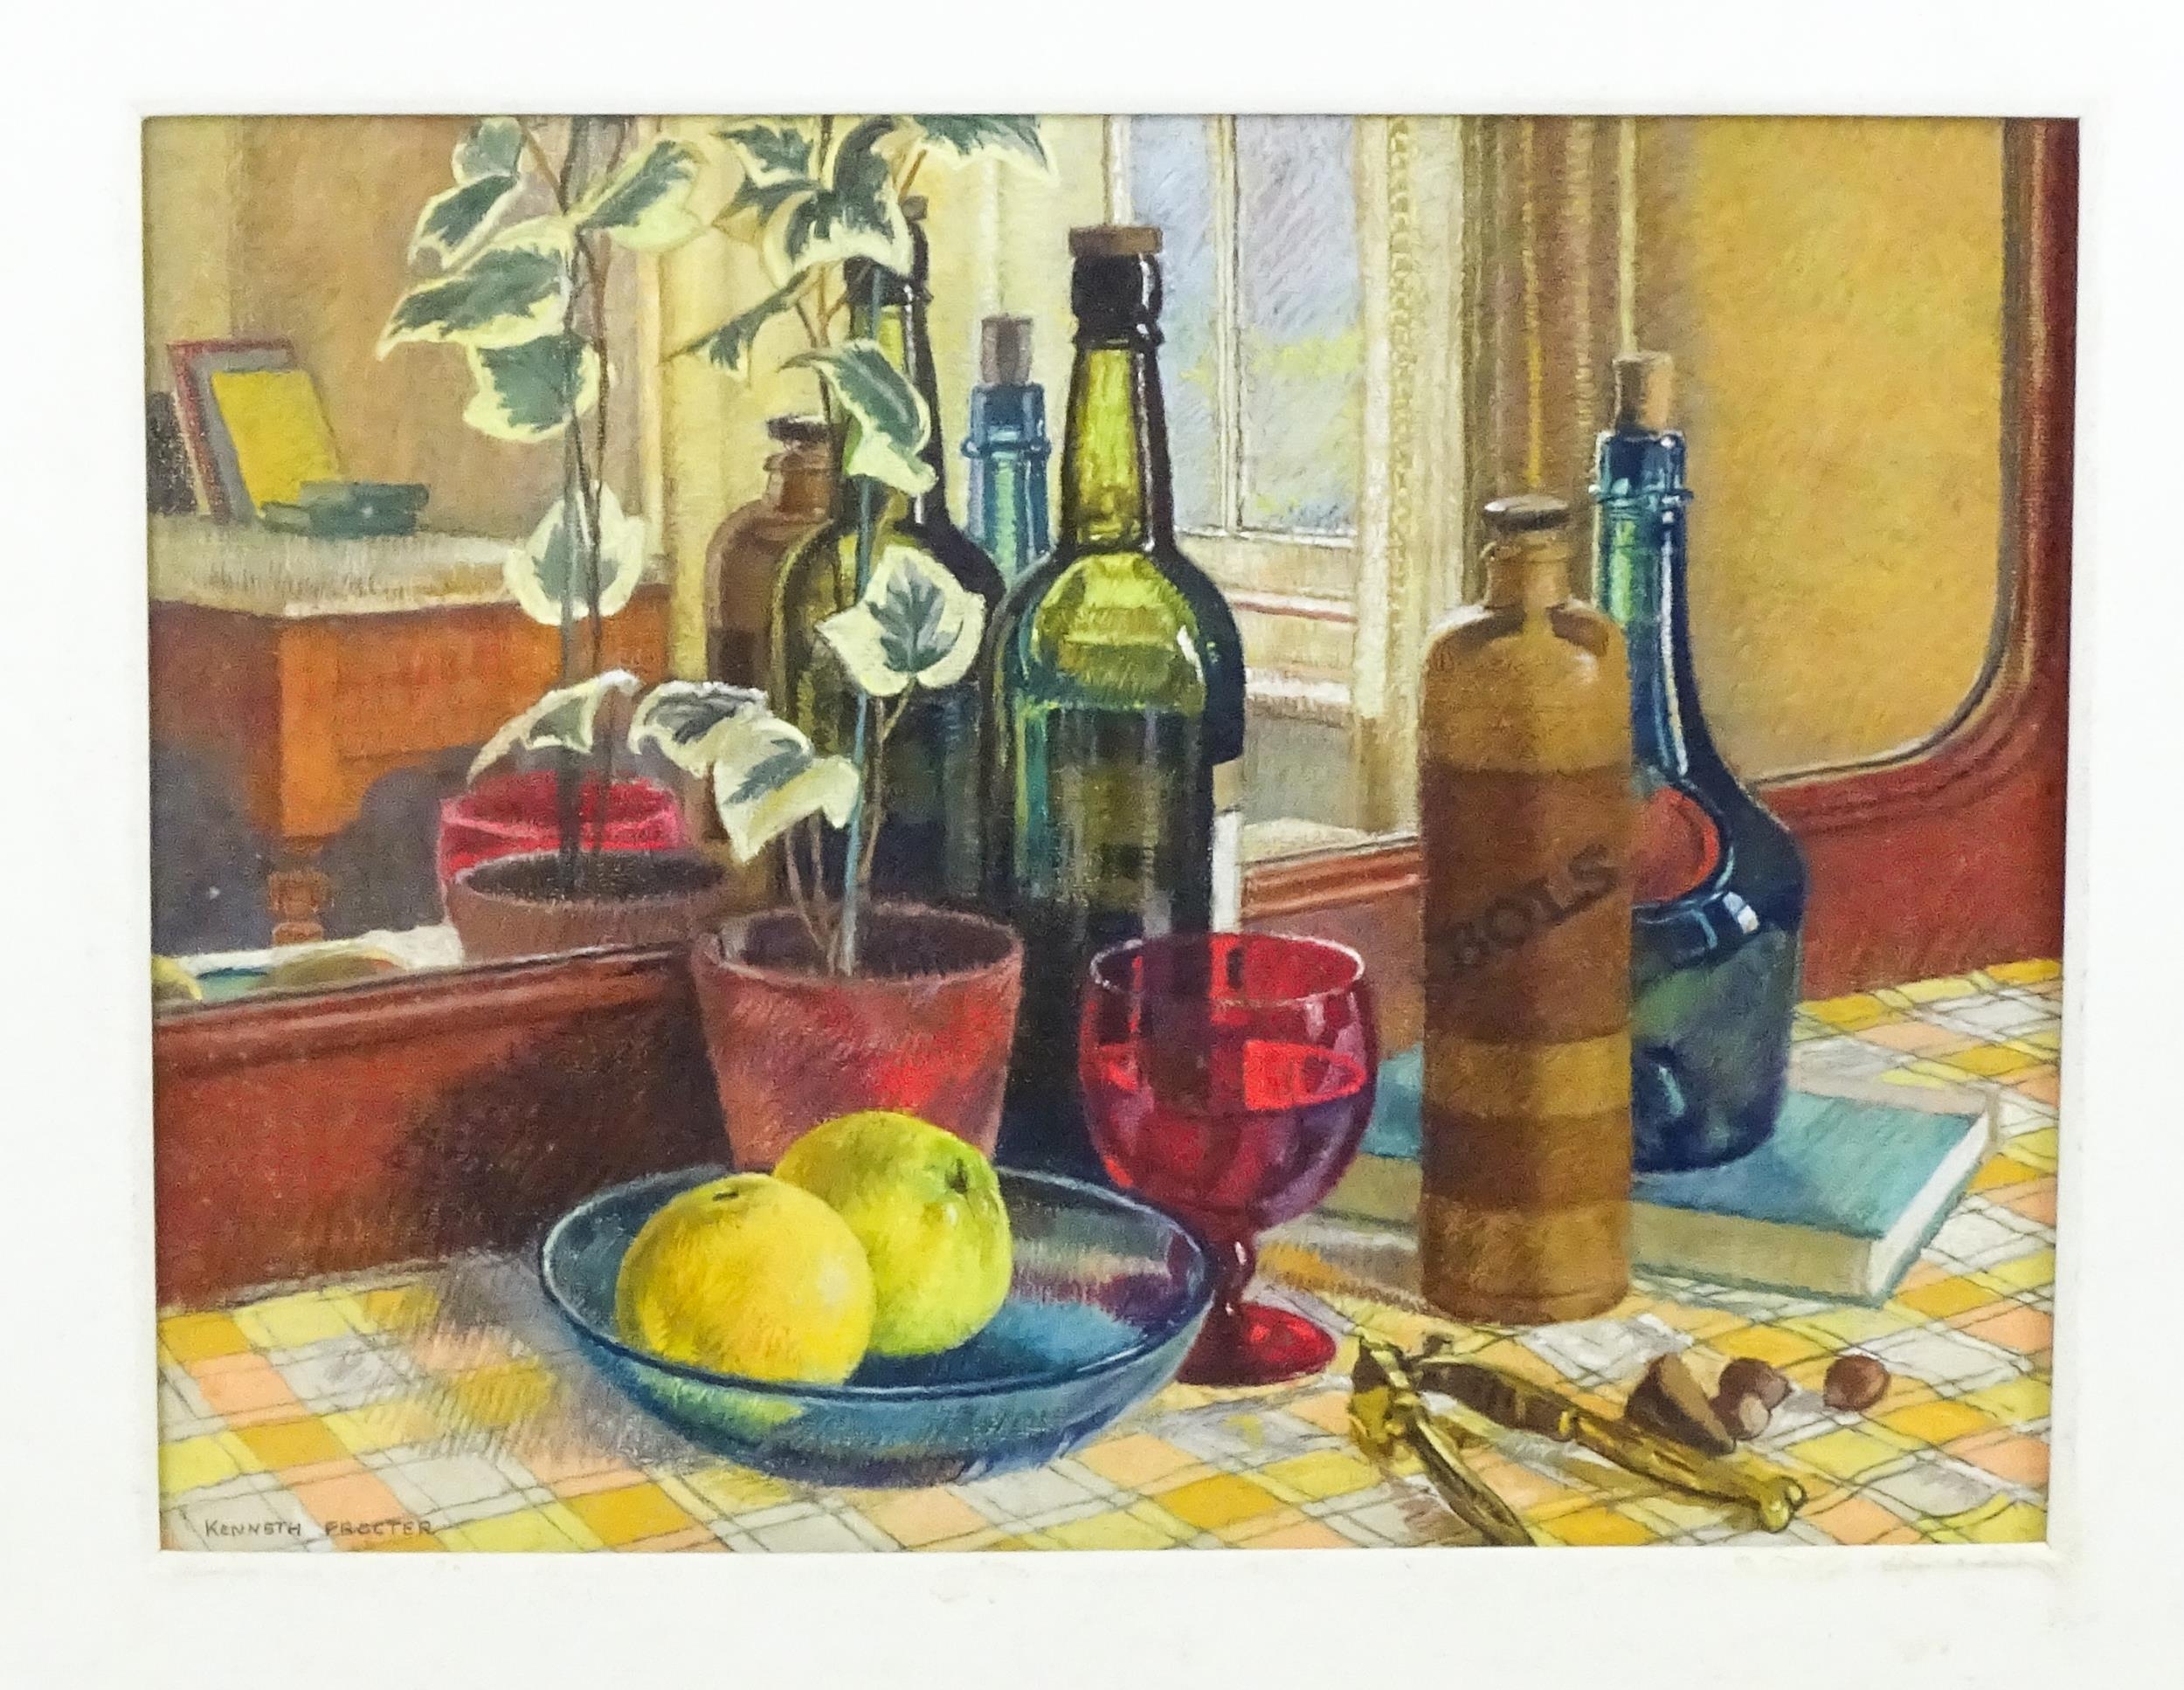 Kenneth Procter (1909-1999), Pastel, A still life study with a plant, bottles, nutcrackers, and a - Image 3 of 4